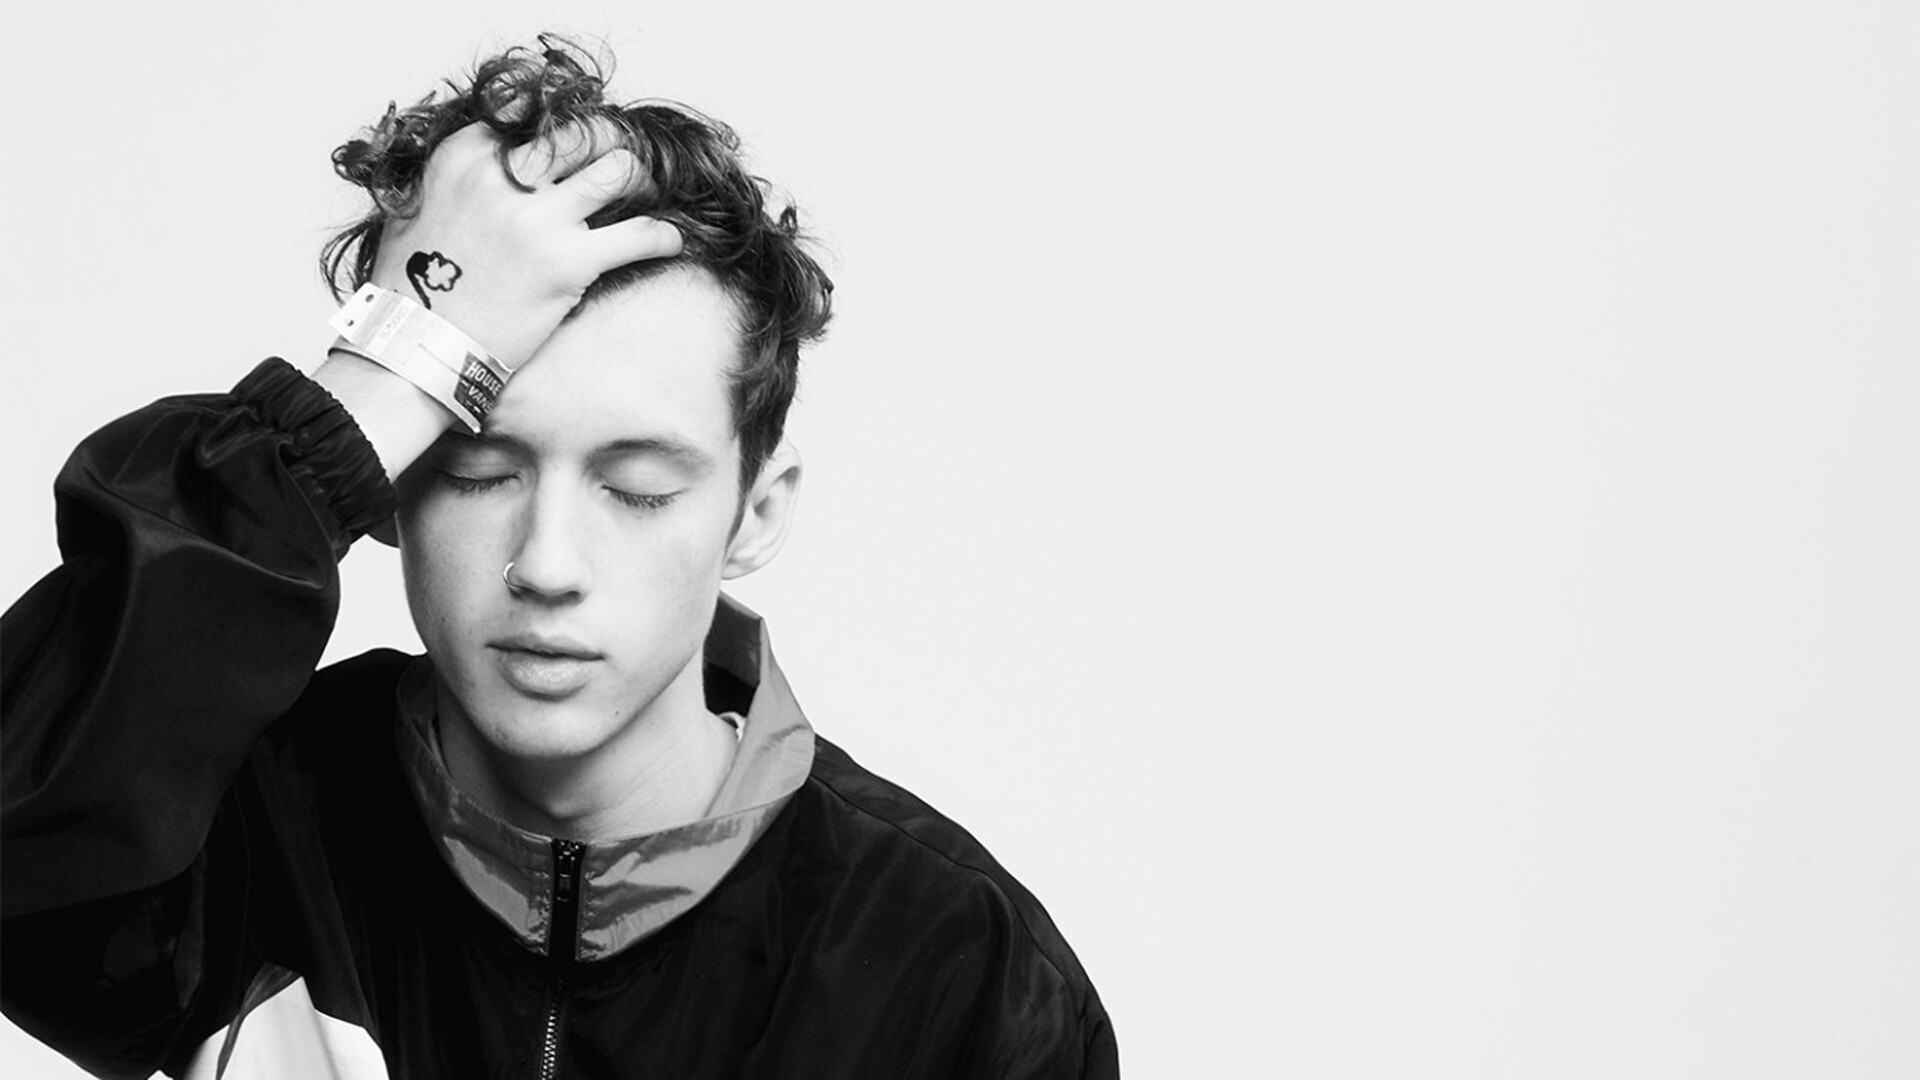 Troye Sivan: "Happy Little Pill" peaked at number 10 on the Australian ARIA Singles Chart. 1920x1080 Full HD Background.